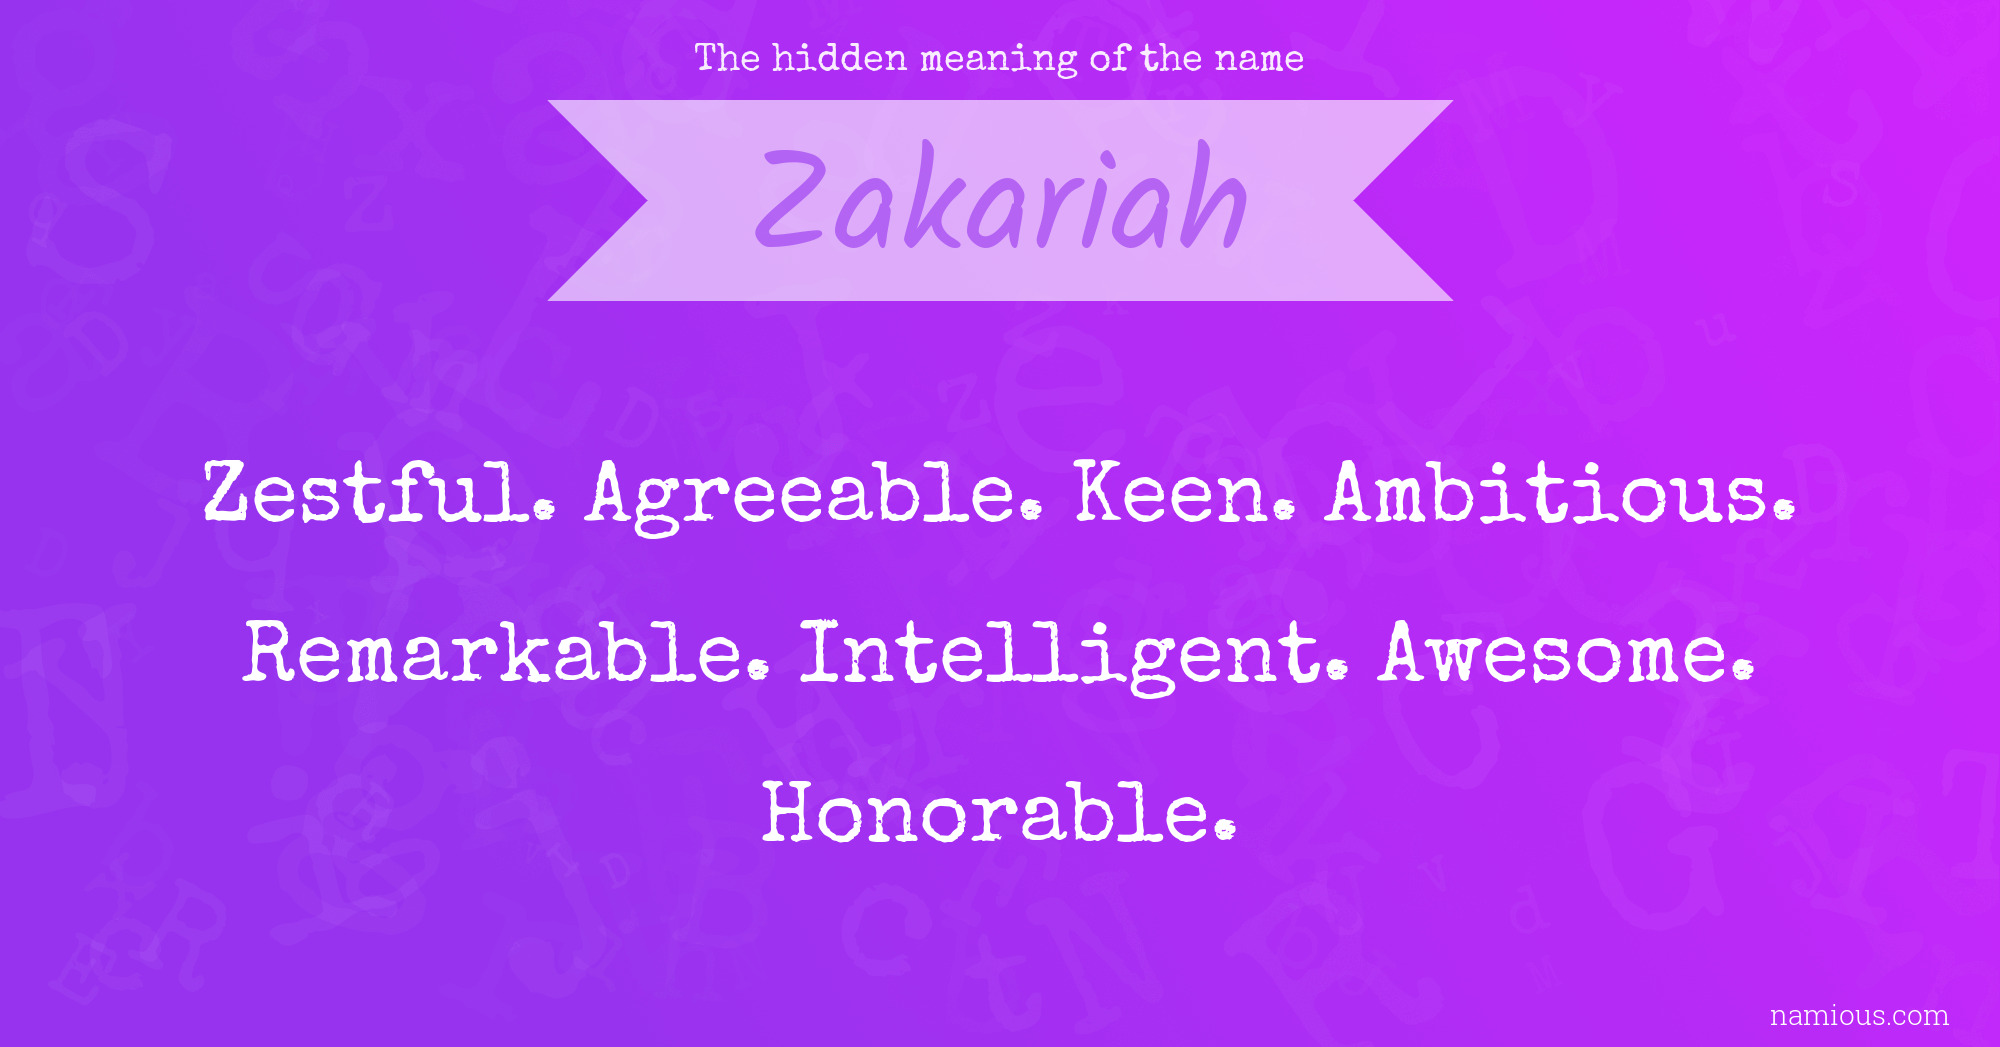 The hidden meaning of the name Zakariah